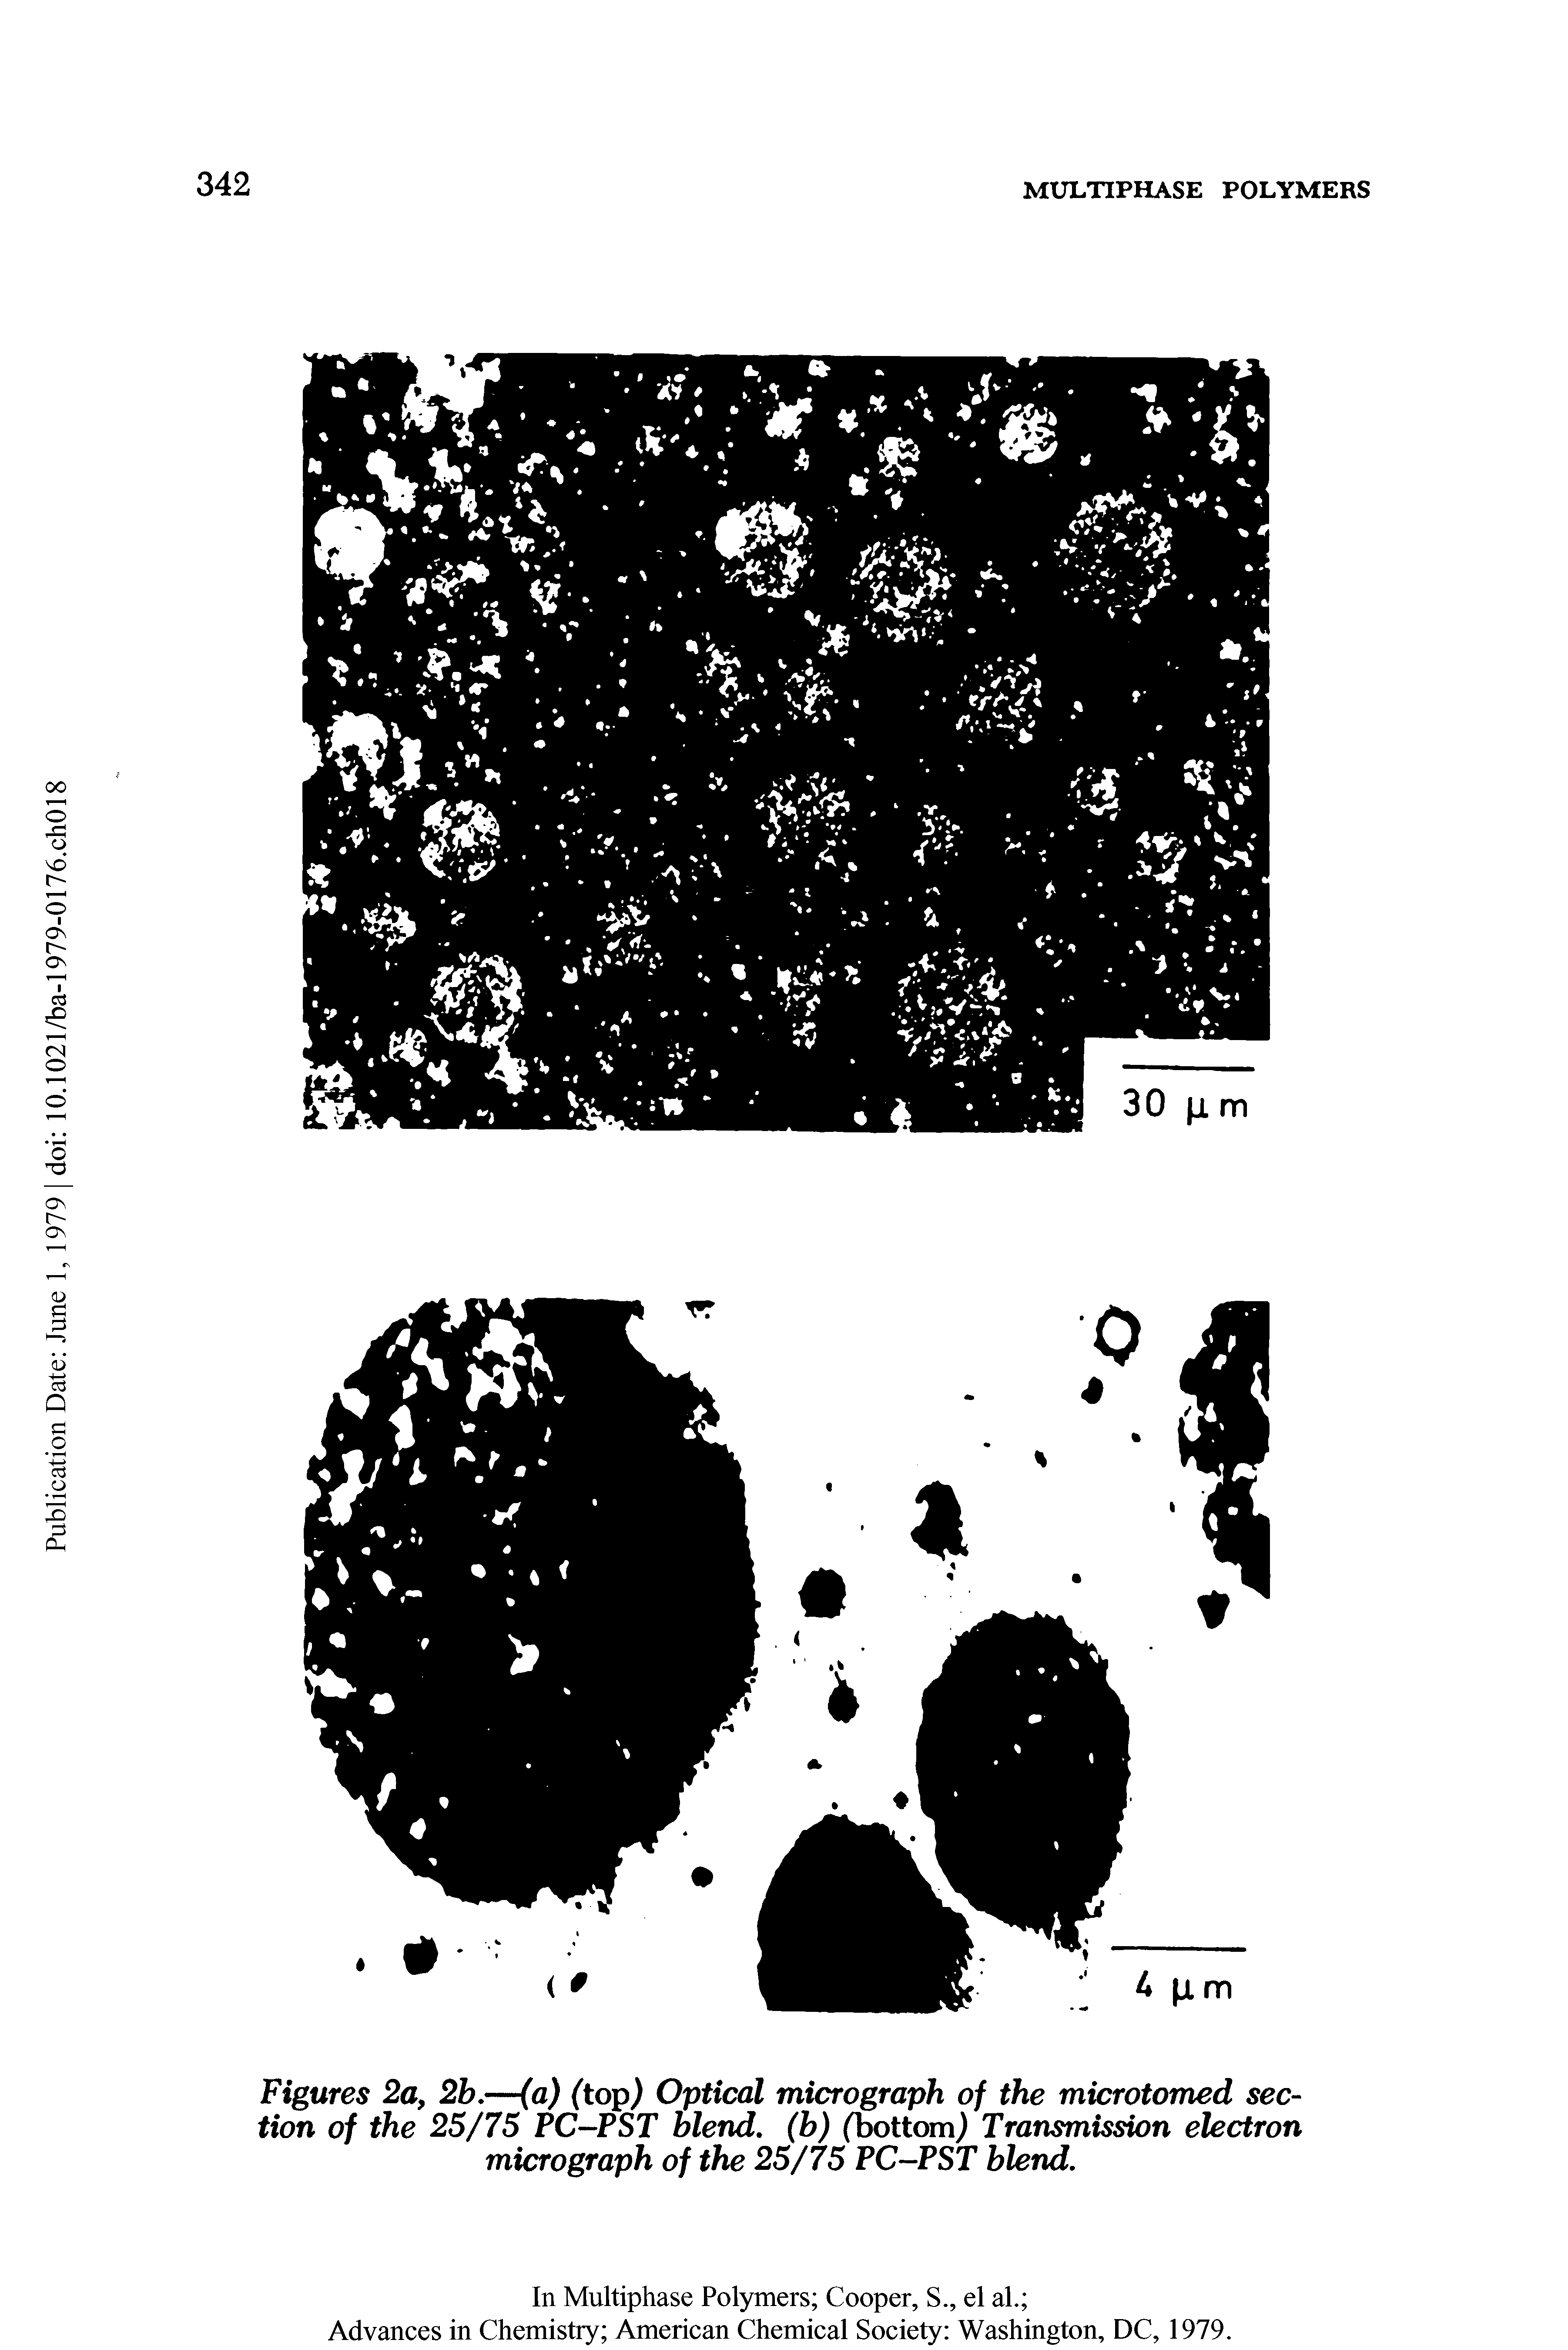 Figures 2a, 2b.—(a) (top) Optical micrograph of the microtomed section of the 25/75 PC-PST blend. (b) (bottom) Transmission electron micrograph of the 25/75 PC-PST blend.